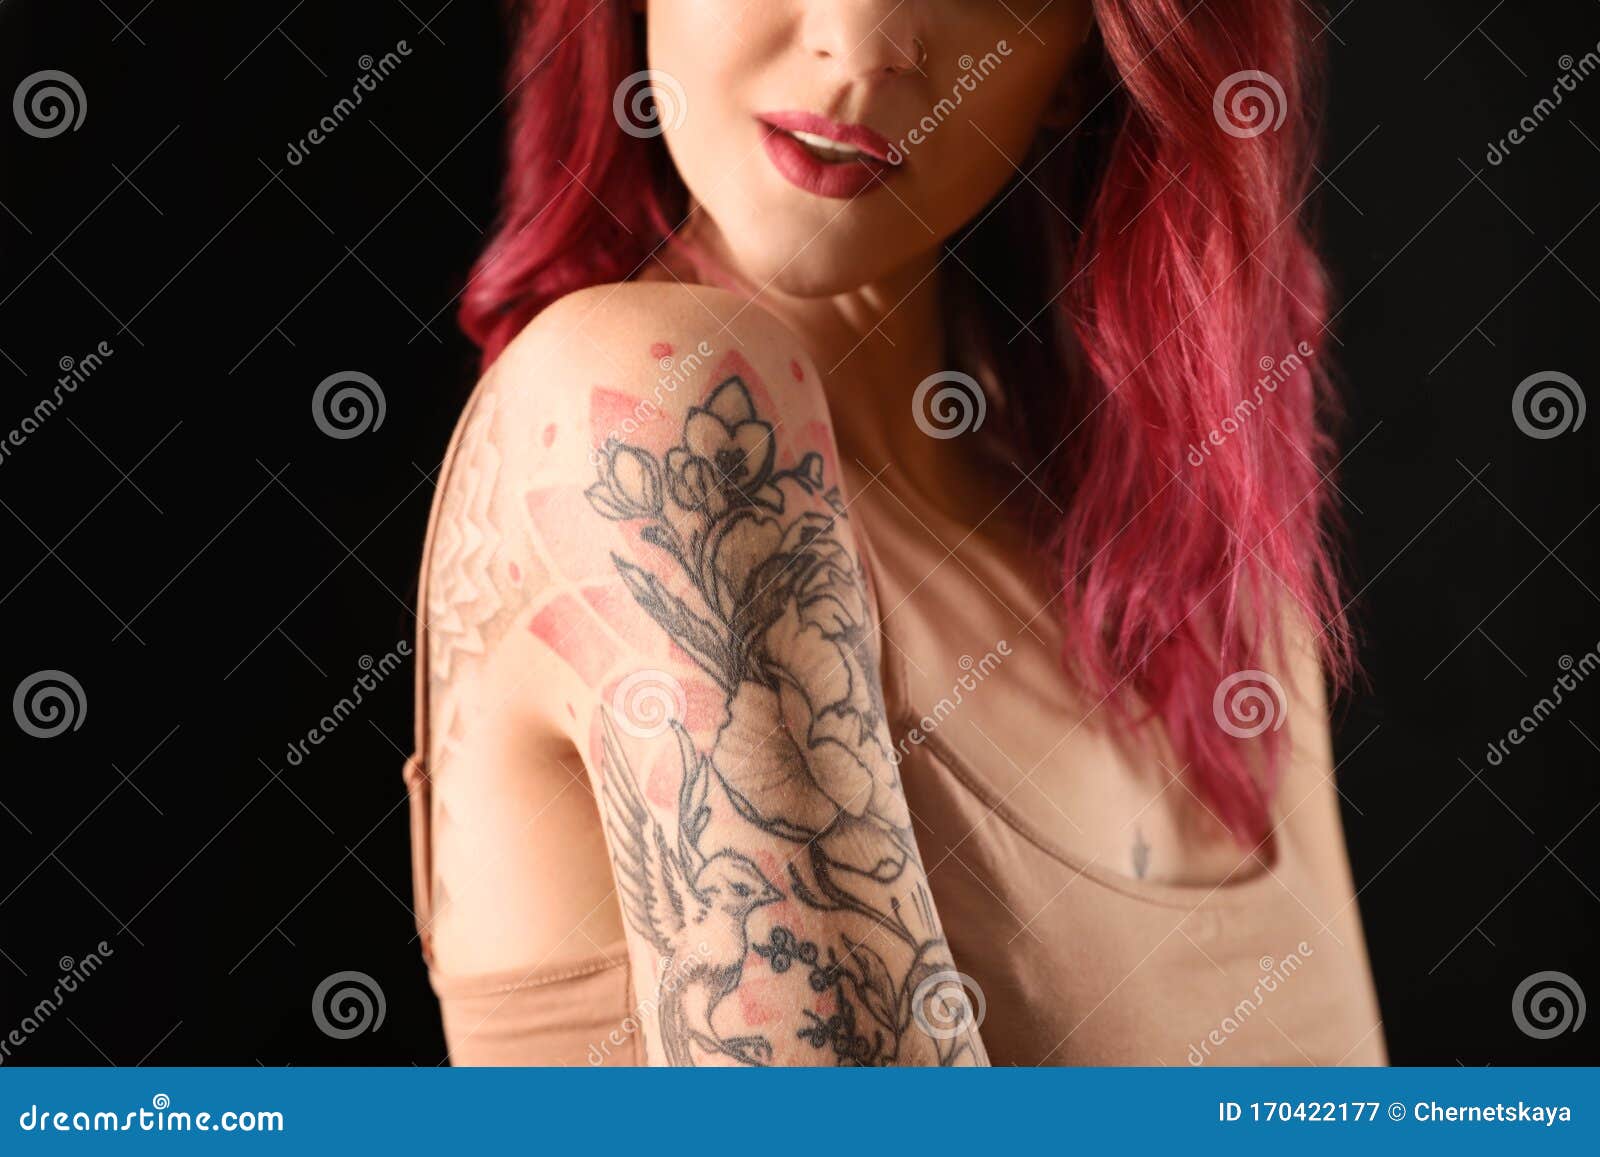 Beautiful Tattooed Girl Images Browse 147264 Stock Photos  Vectors Free  Download with Trial  Shutterstock